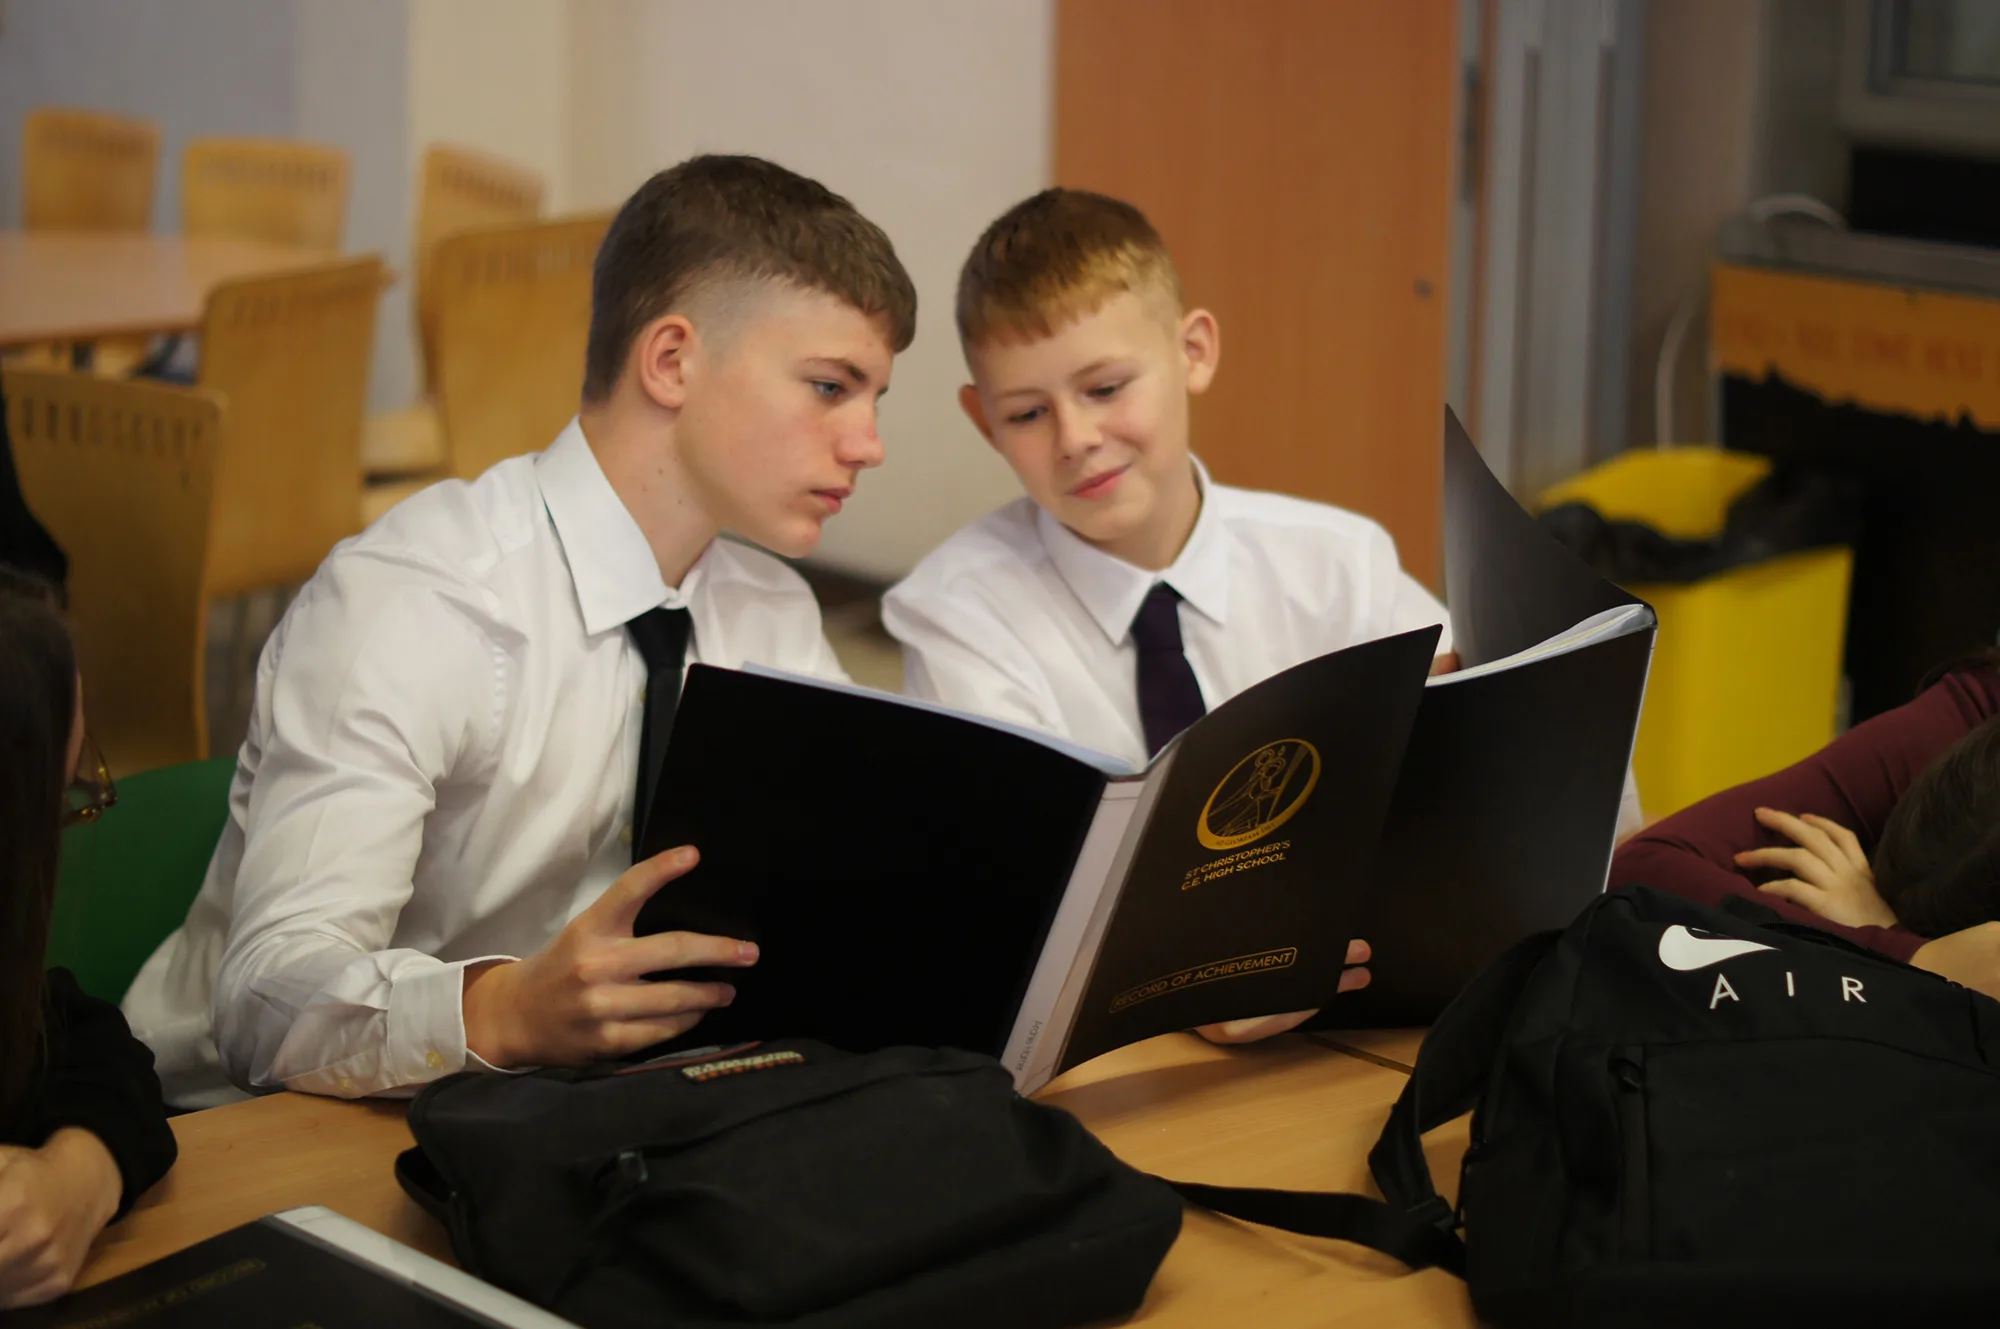 St Christopher’s: Year 11 pupils learn more about the steps after school with the ‘Make it Work Day’ featuring mock interviews, CV writing tips and more.